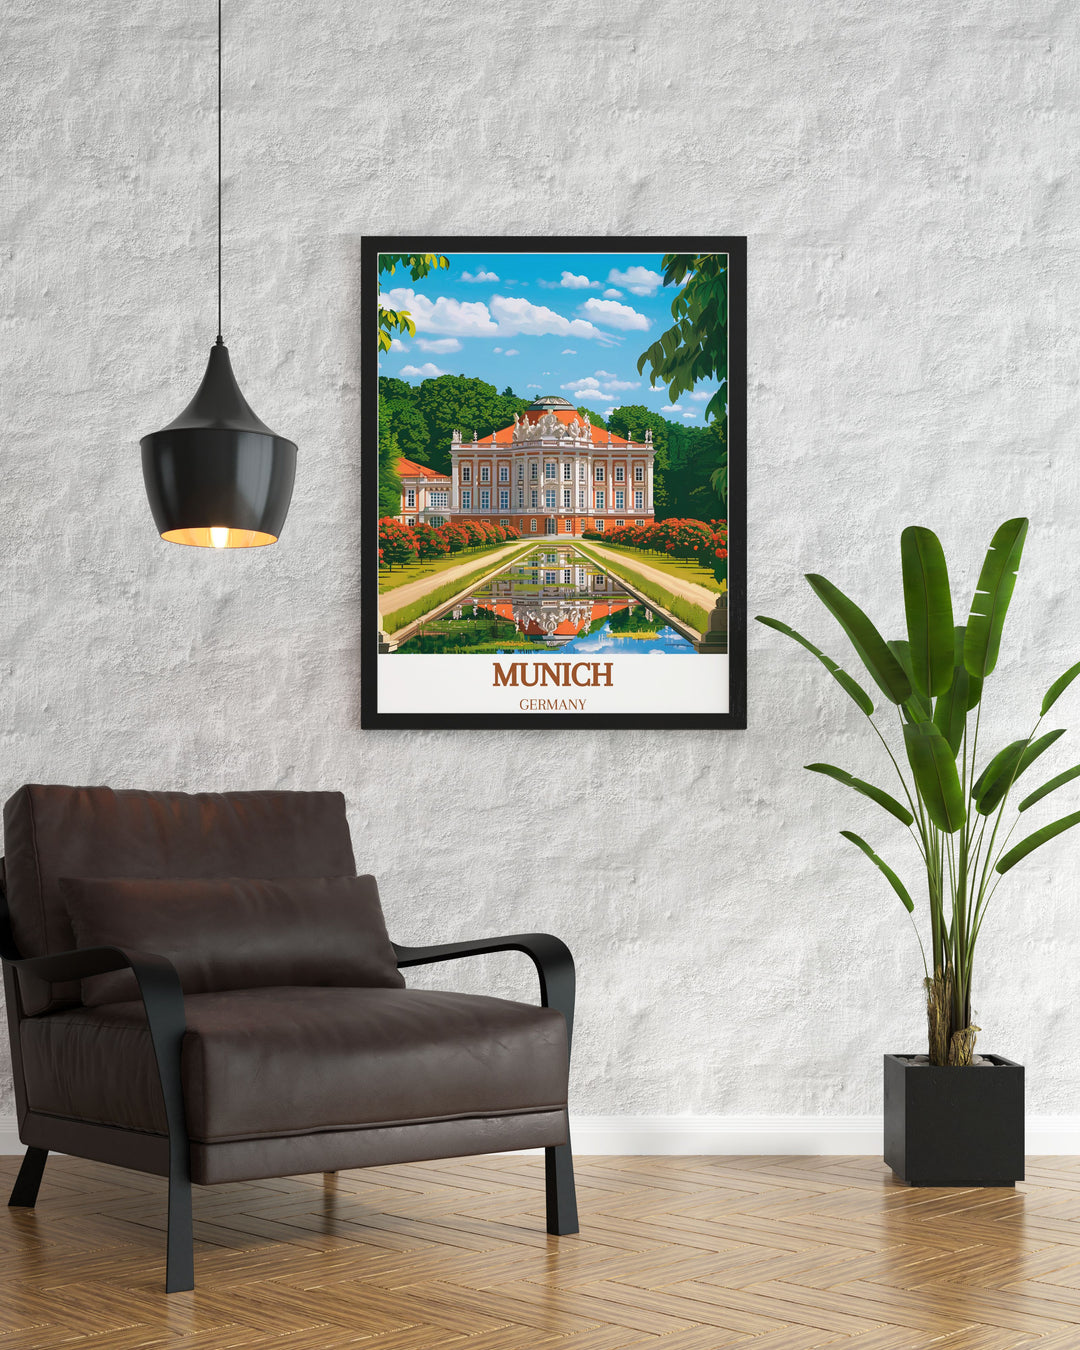 High quality Munich Photography featuring GERMANY Nymphenburg Palace perfect for art and travel enthusiasts captures the beauty and historical significance of Munichs landmarks ideal addition to Germany wall art collection thoughtful gifts for special occasions